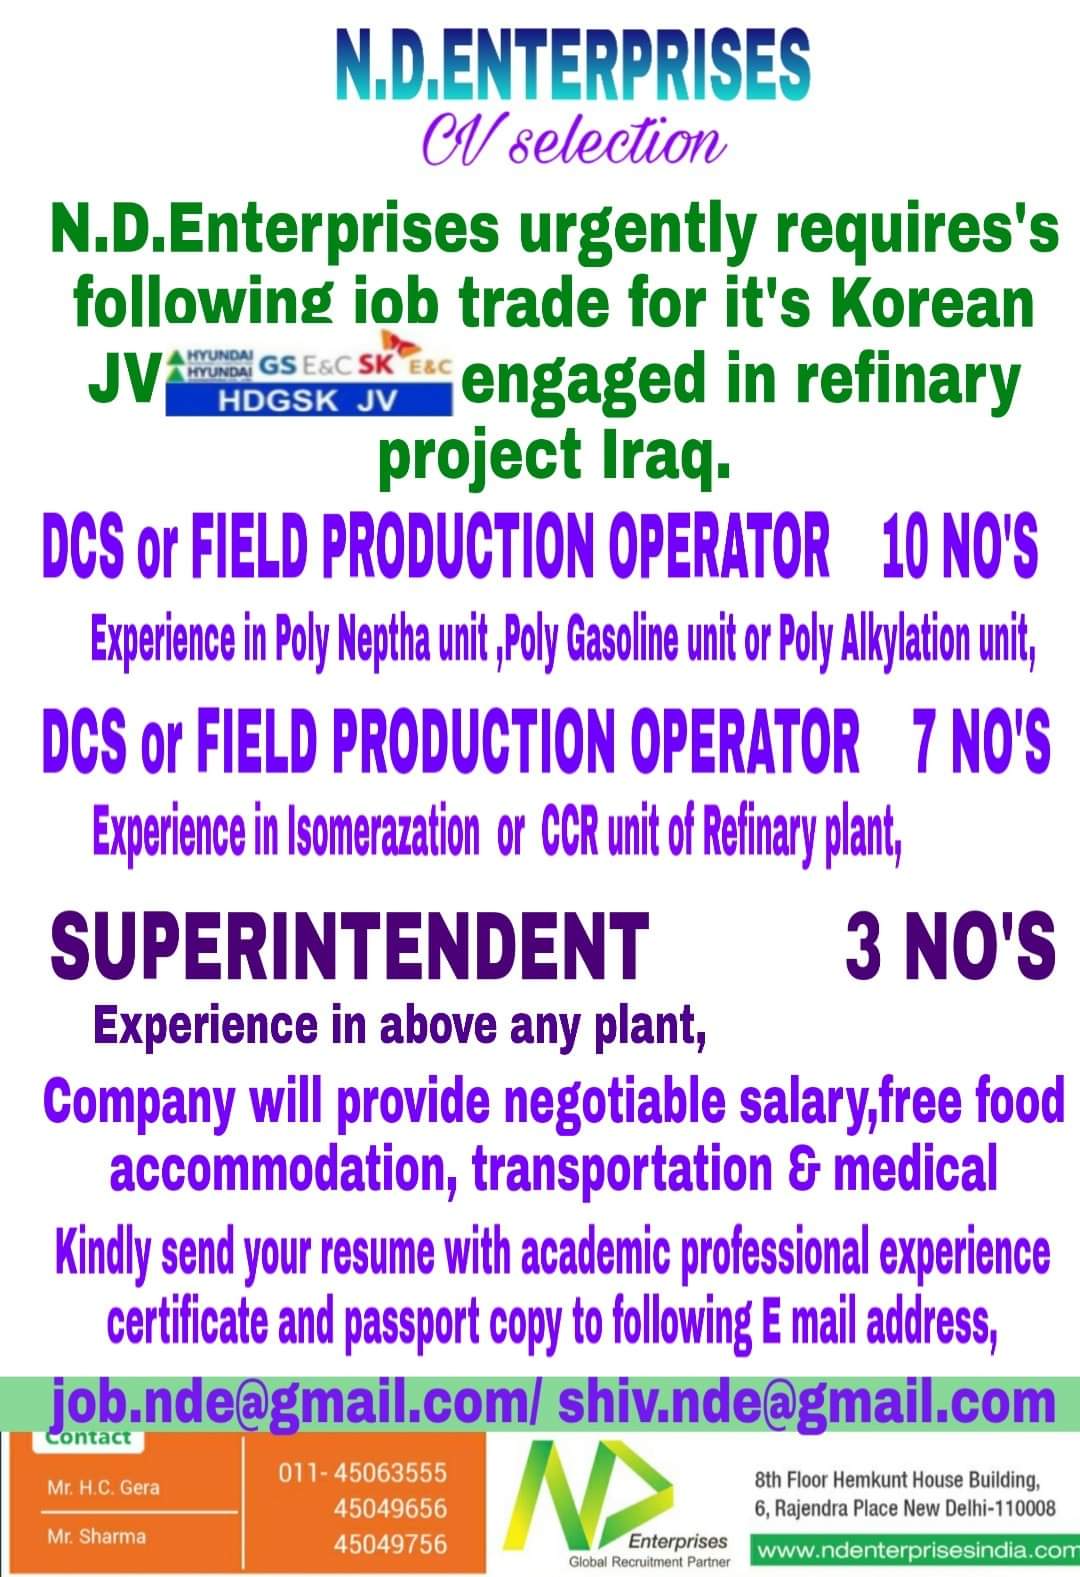 URGENTLY REQUIREMENT FOR REFINARY PROJECT IN IRAQ